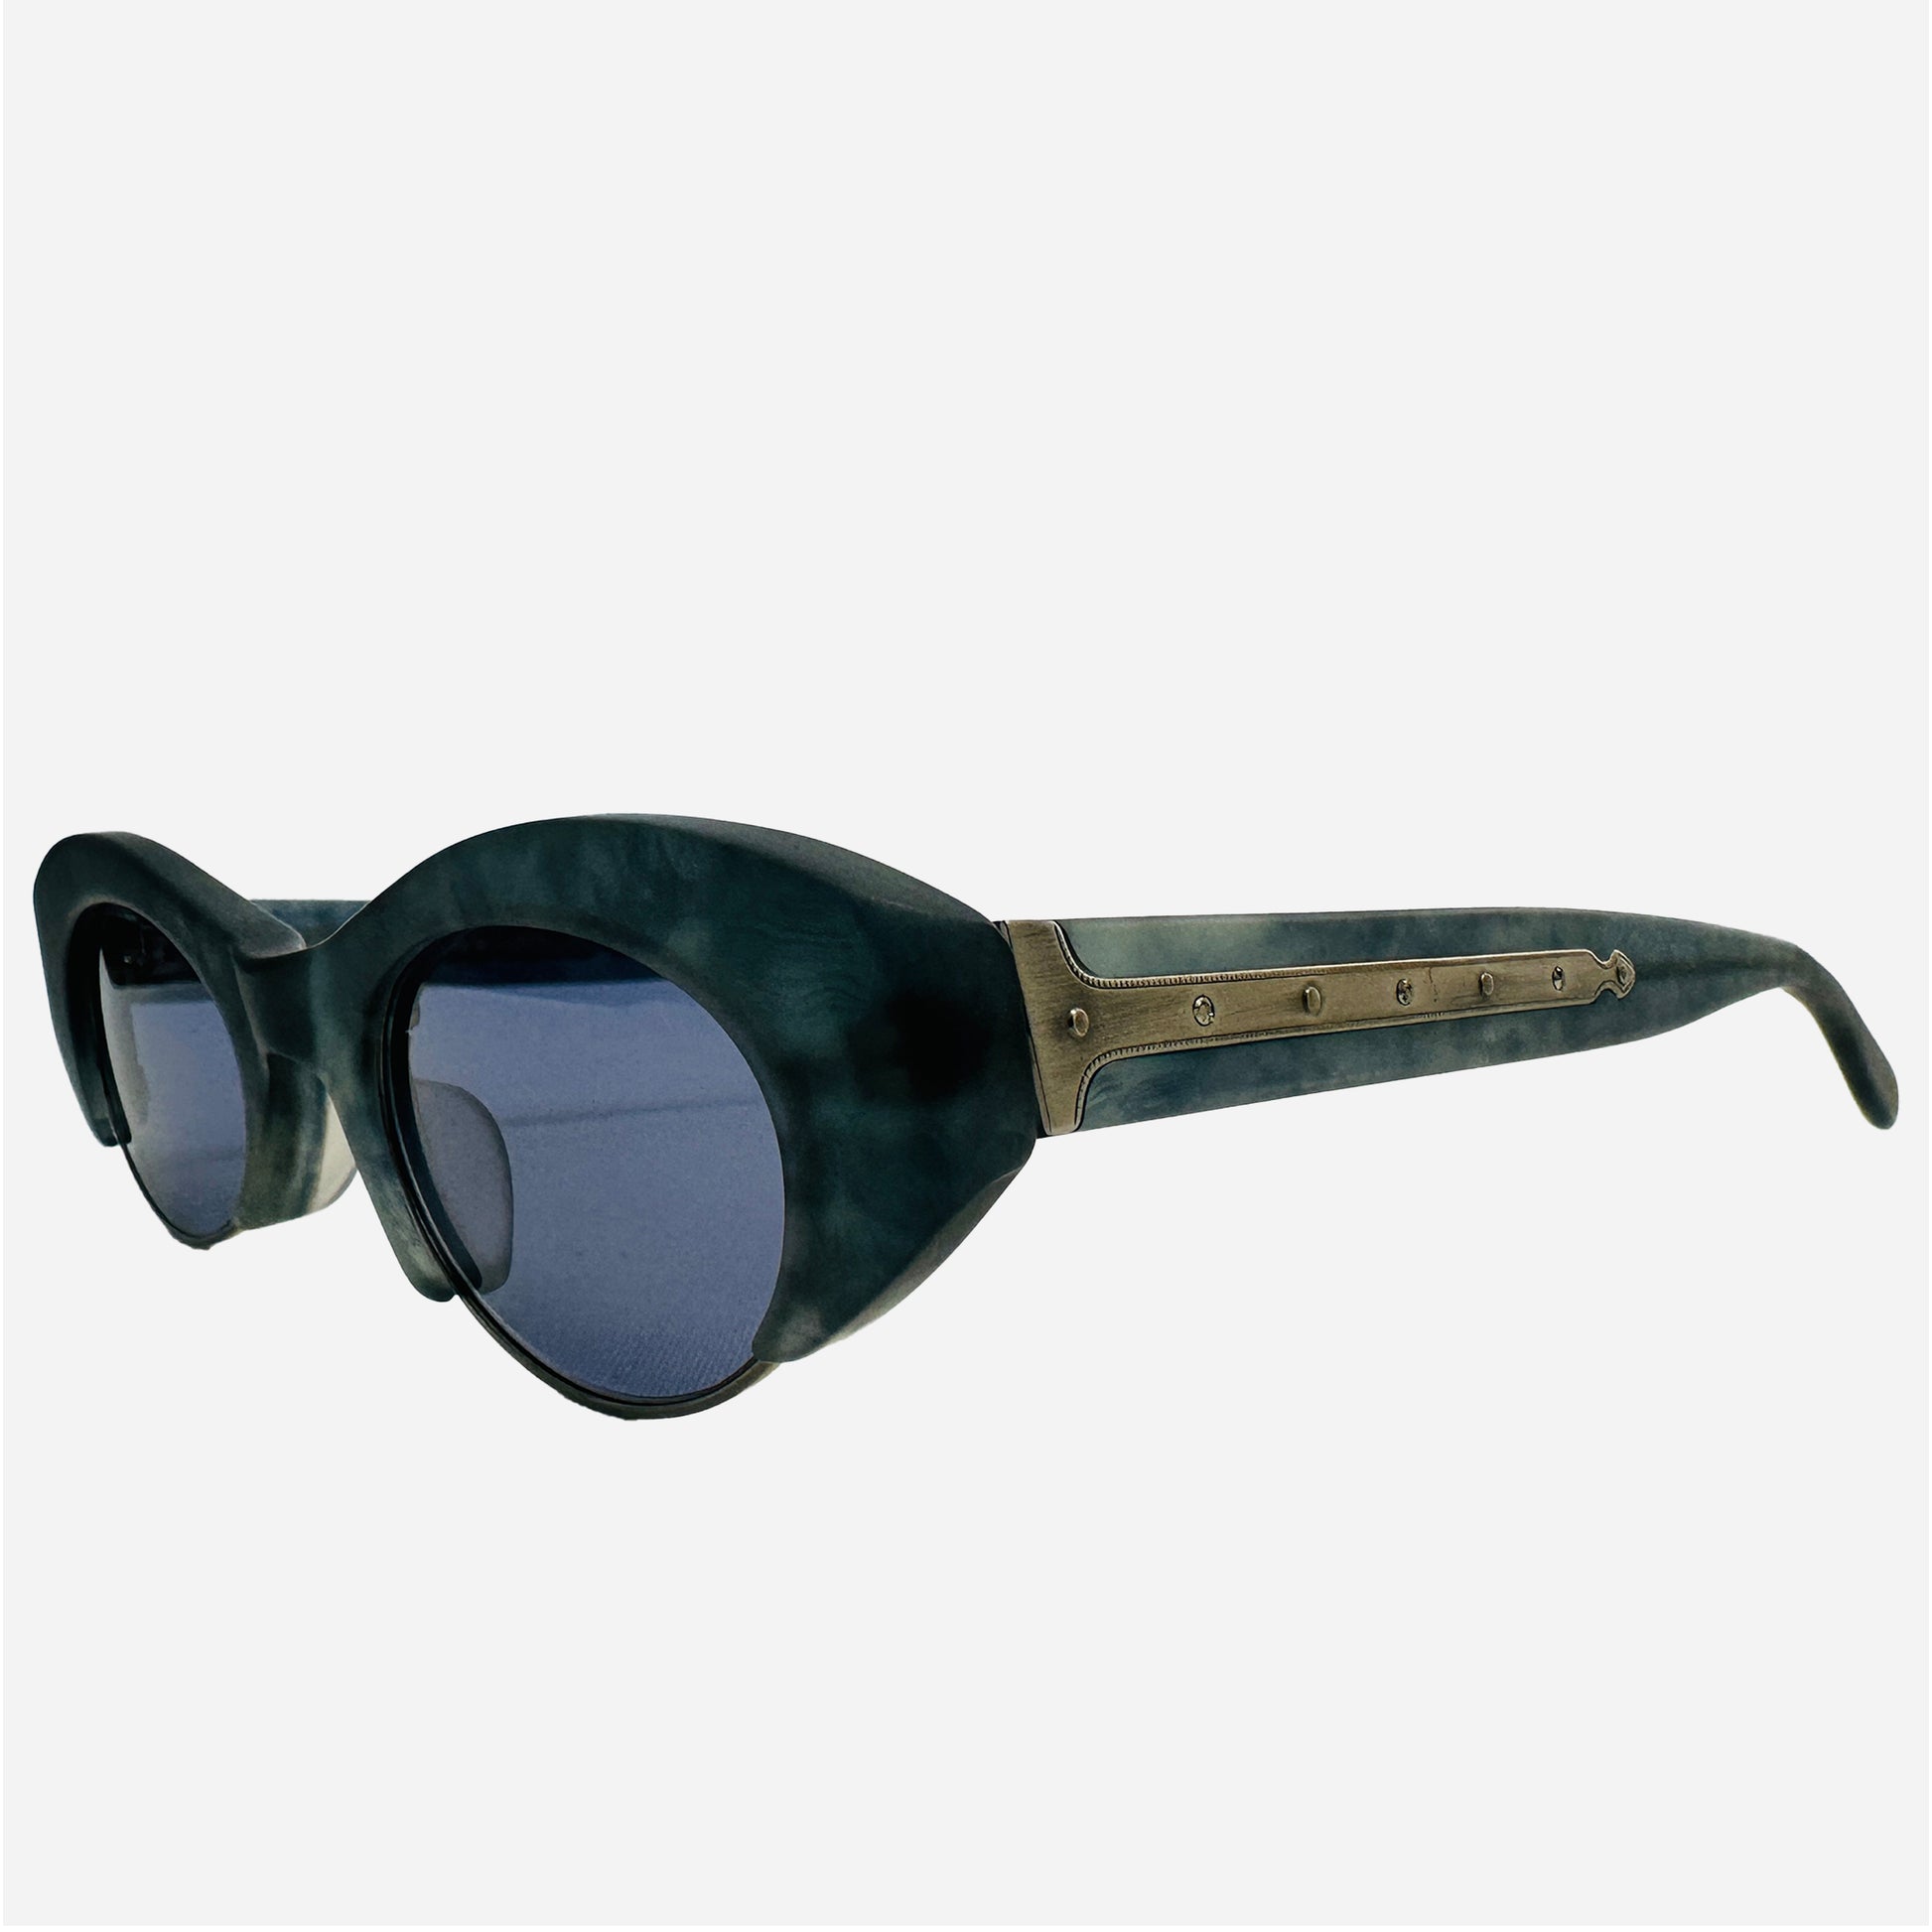 Vintage-Matsuda-Sonnenbrille-Sunglasses-10612-horn-the-seekers-front-1